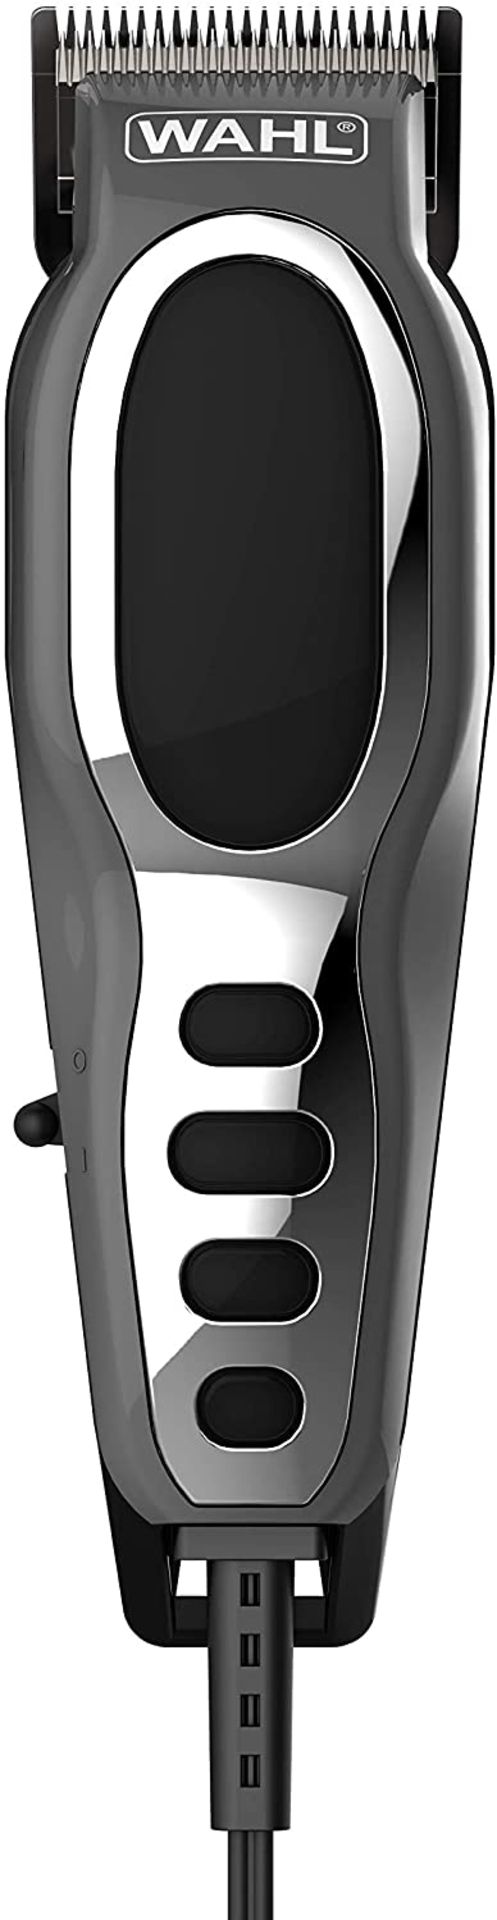 RRP £27 Wahl Hair Clippers for Men, Close Cut Head Shaver Men's Hair Clippers, Balding Clippers for